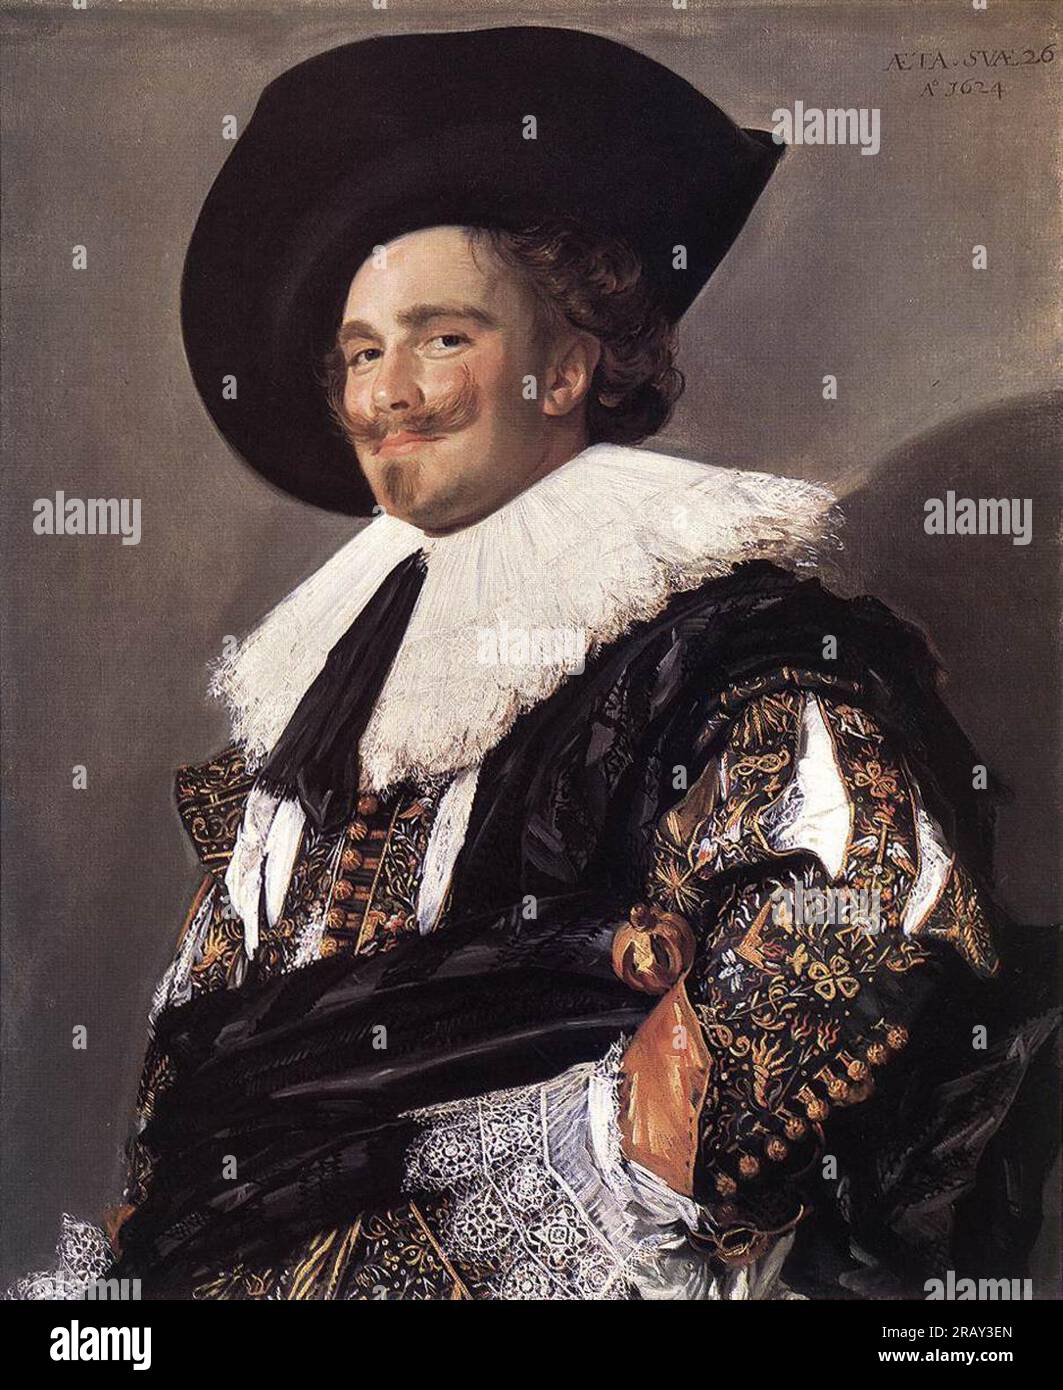 The Laughing Cavalier 1624 by Frans Hals Stock Photo